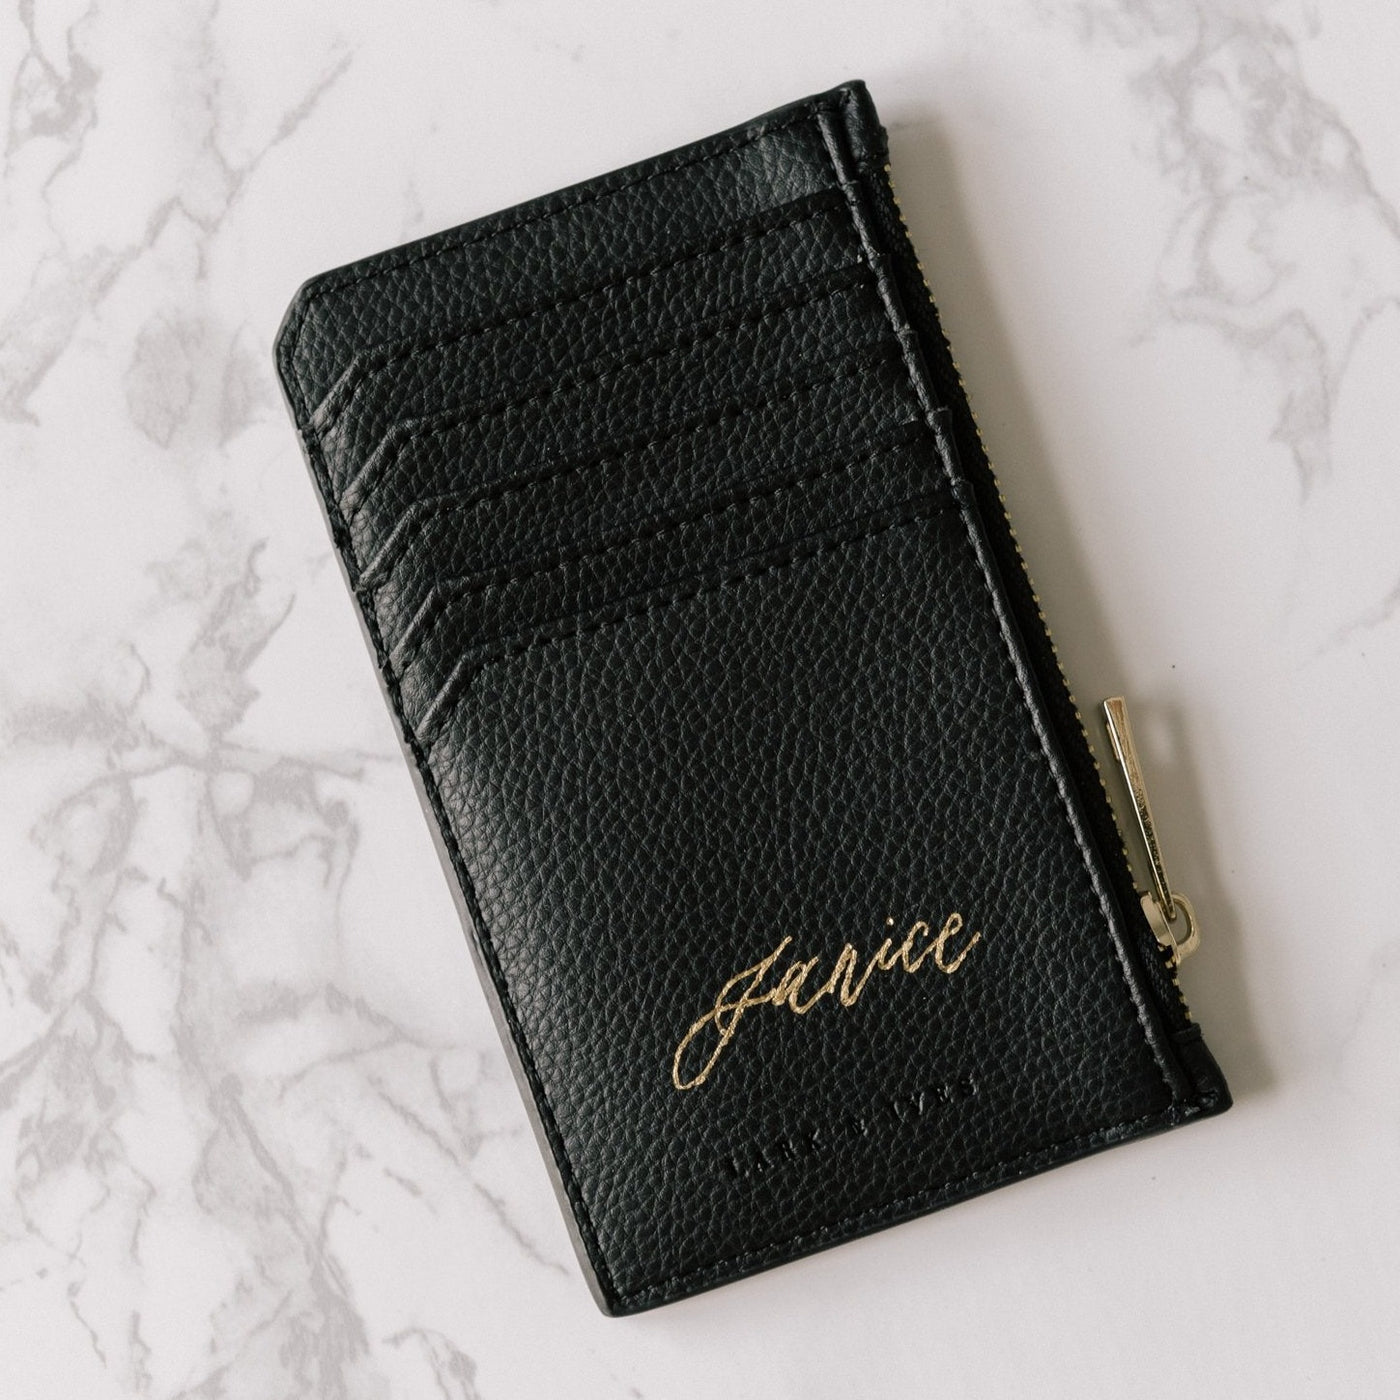 Lark and Ives / Vegan Leather Accessories / Small Accessories / Wallet / Mini Wallet / Card Case / Card Holder / Zippered Wallet / Zipper closure / Gold Foil Personalized Card Holder